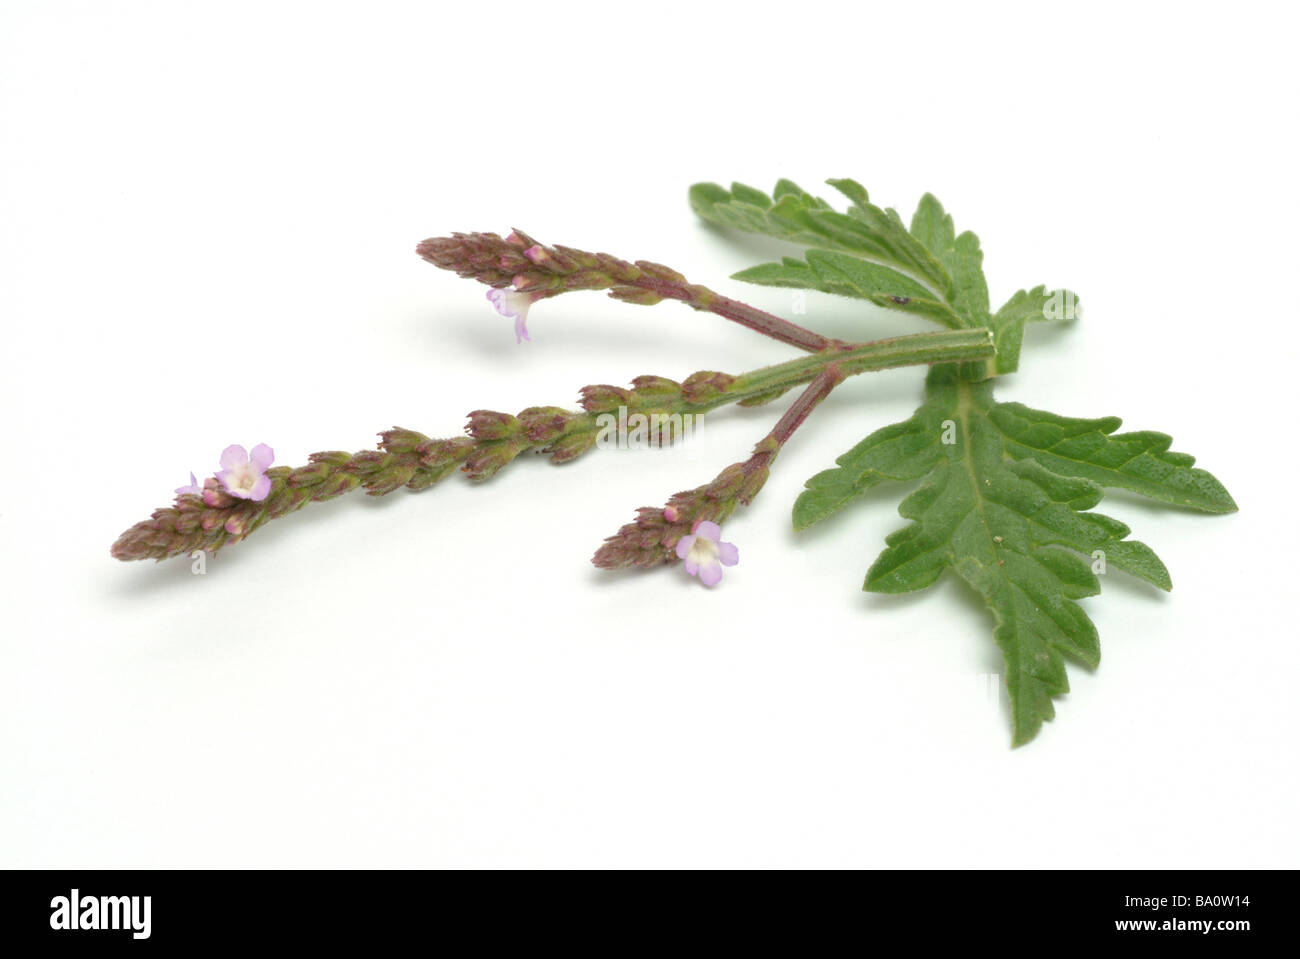 Blossoms and leaves of the medicinal plant Eisenkraut Druidenkraut Common verbena Vervain Herb of grace Verbena officinalis Stock Photo